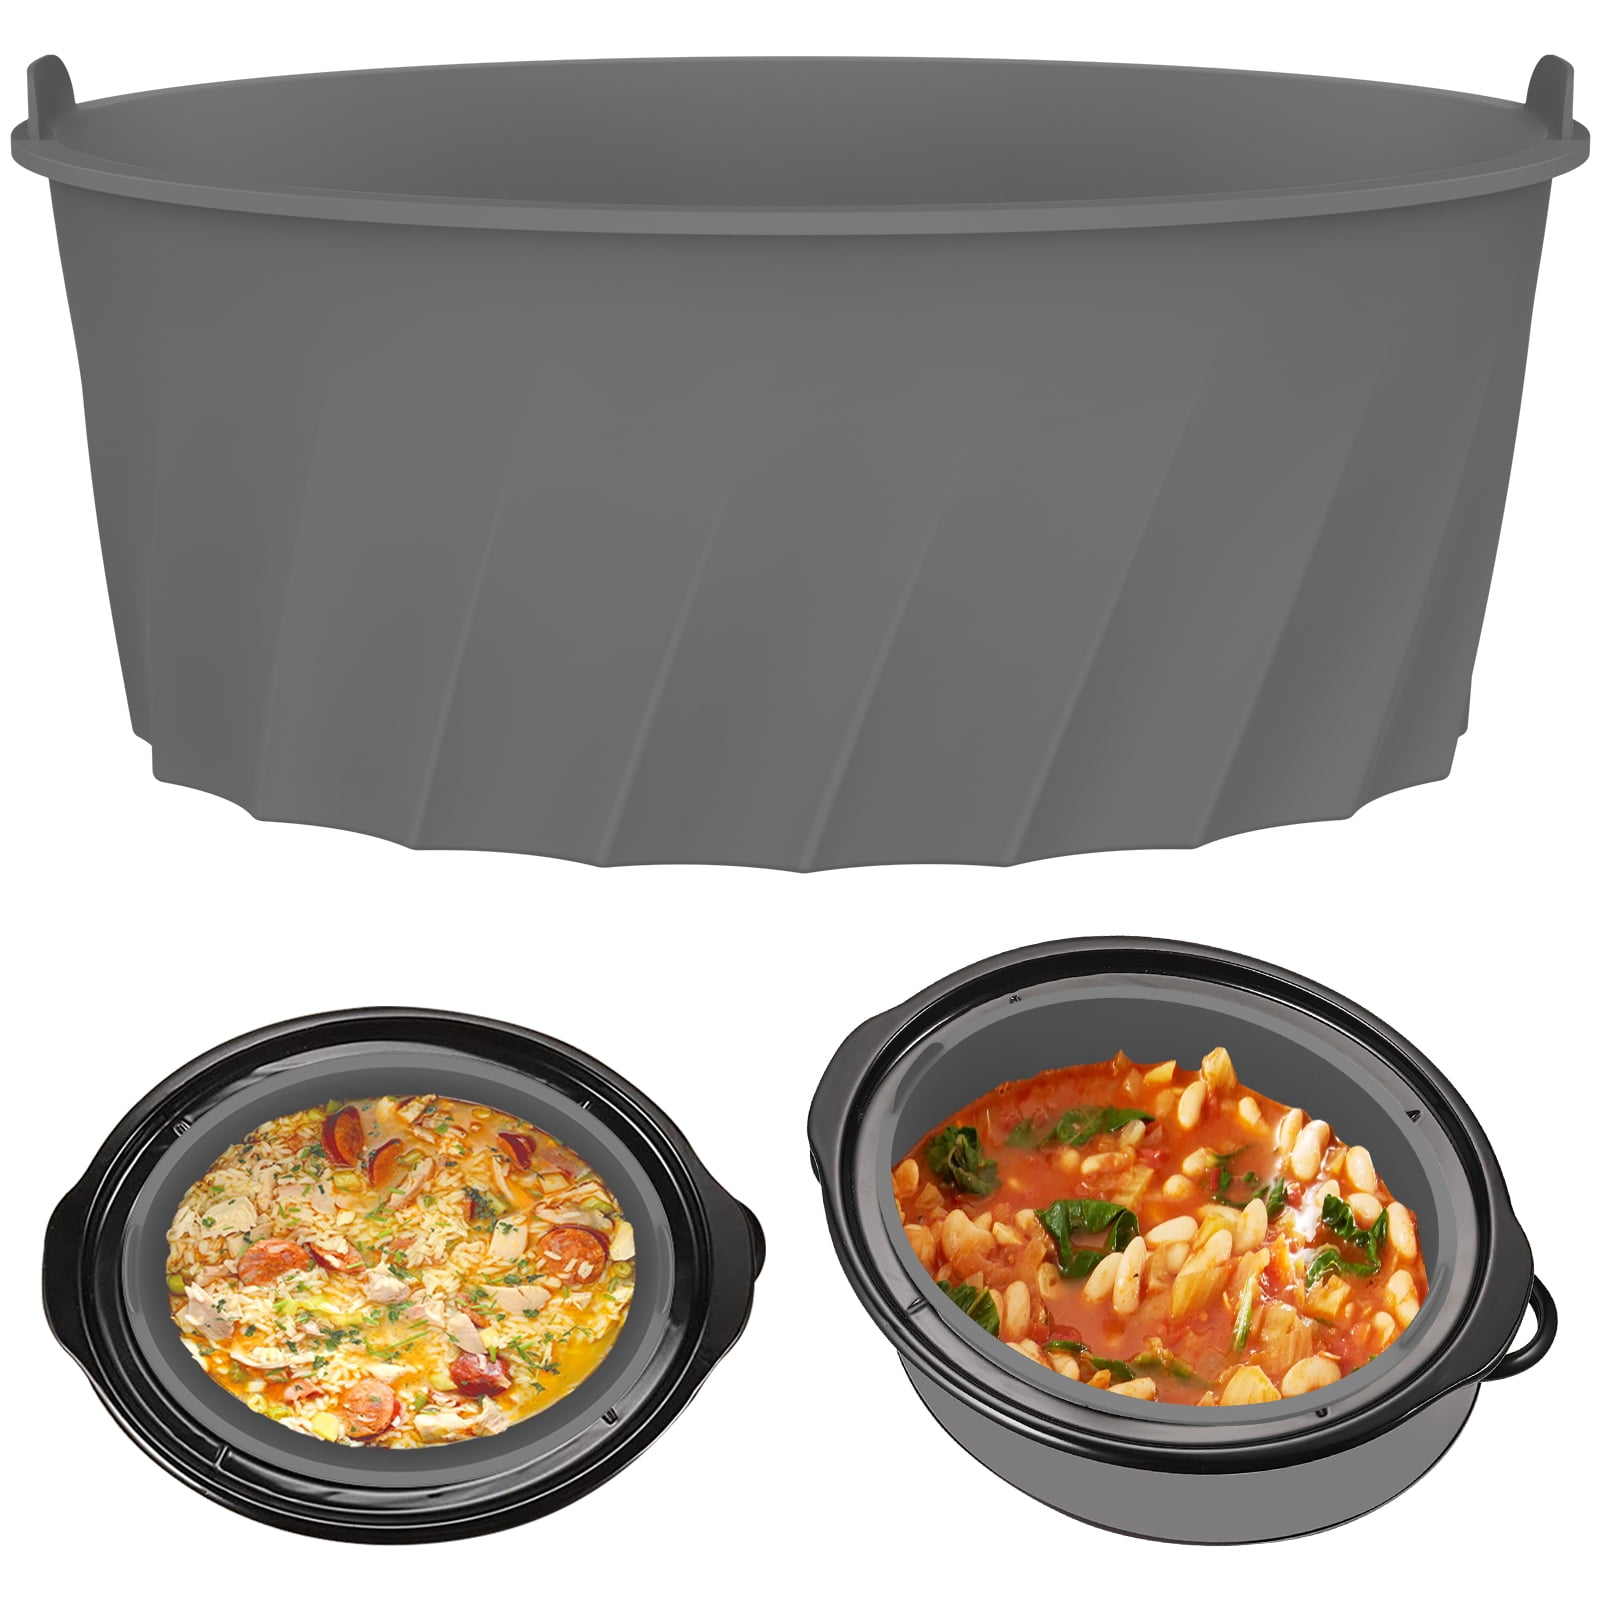 anlinkshine RNAB0BYXHLJVQ silicone slow cooker divider liners compatible  with crockpot 6qt, reusable slow cooker crock pot divider insert (3 in 1)